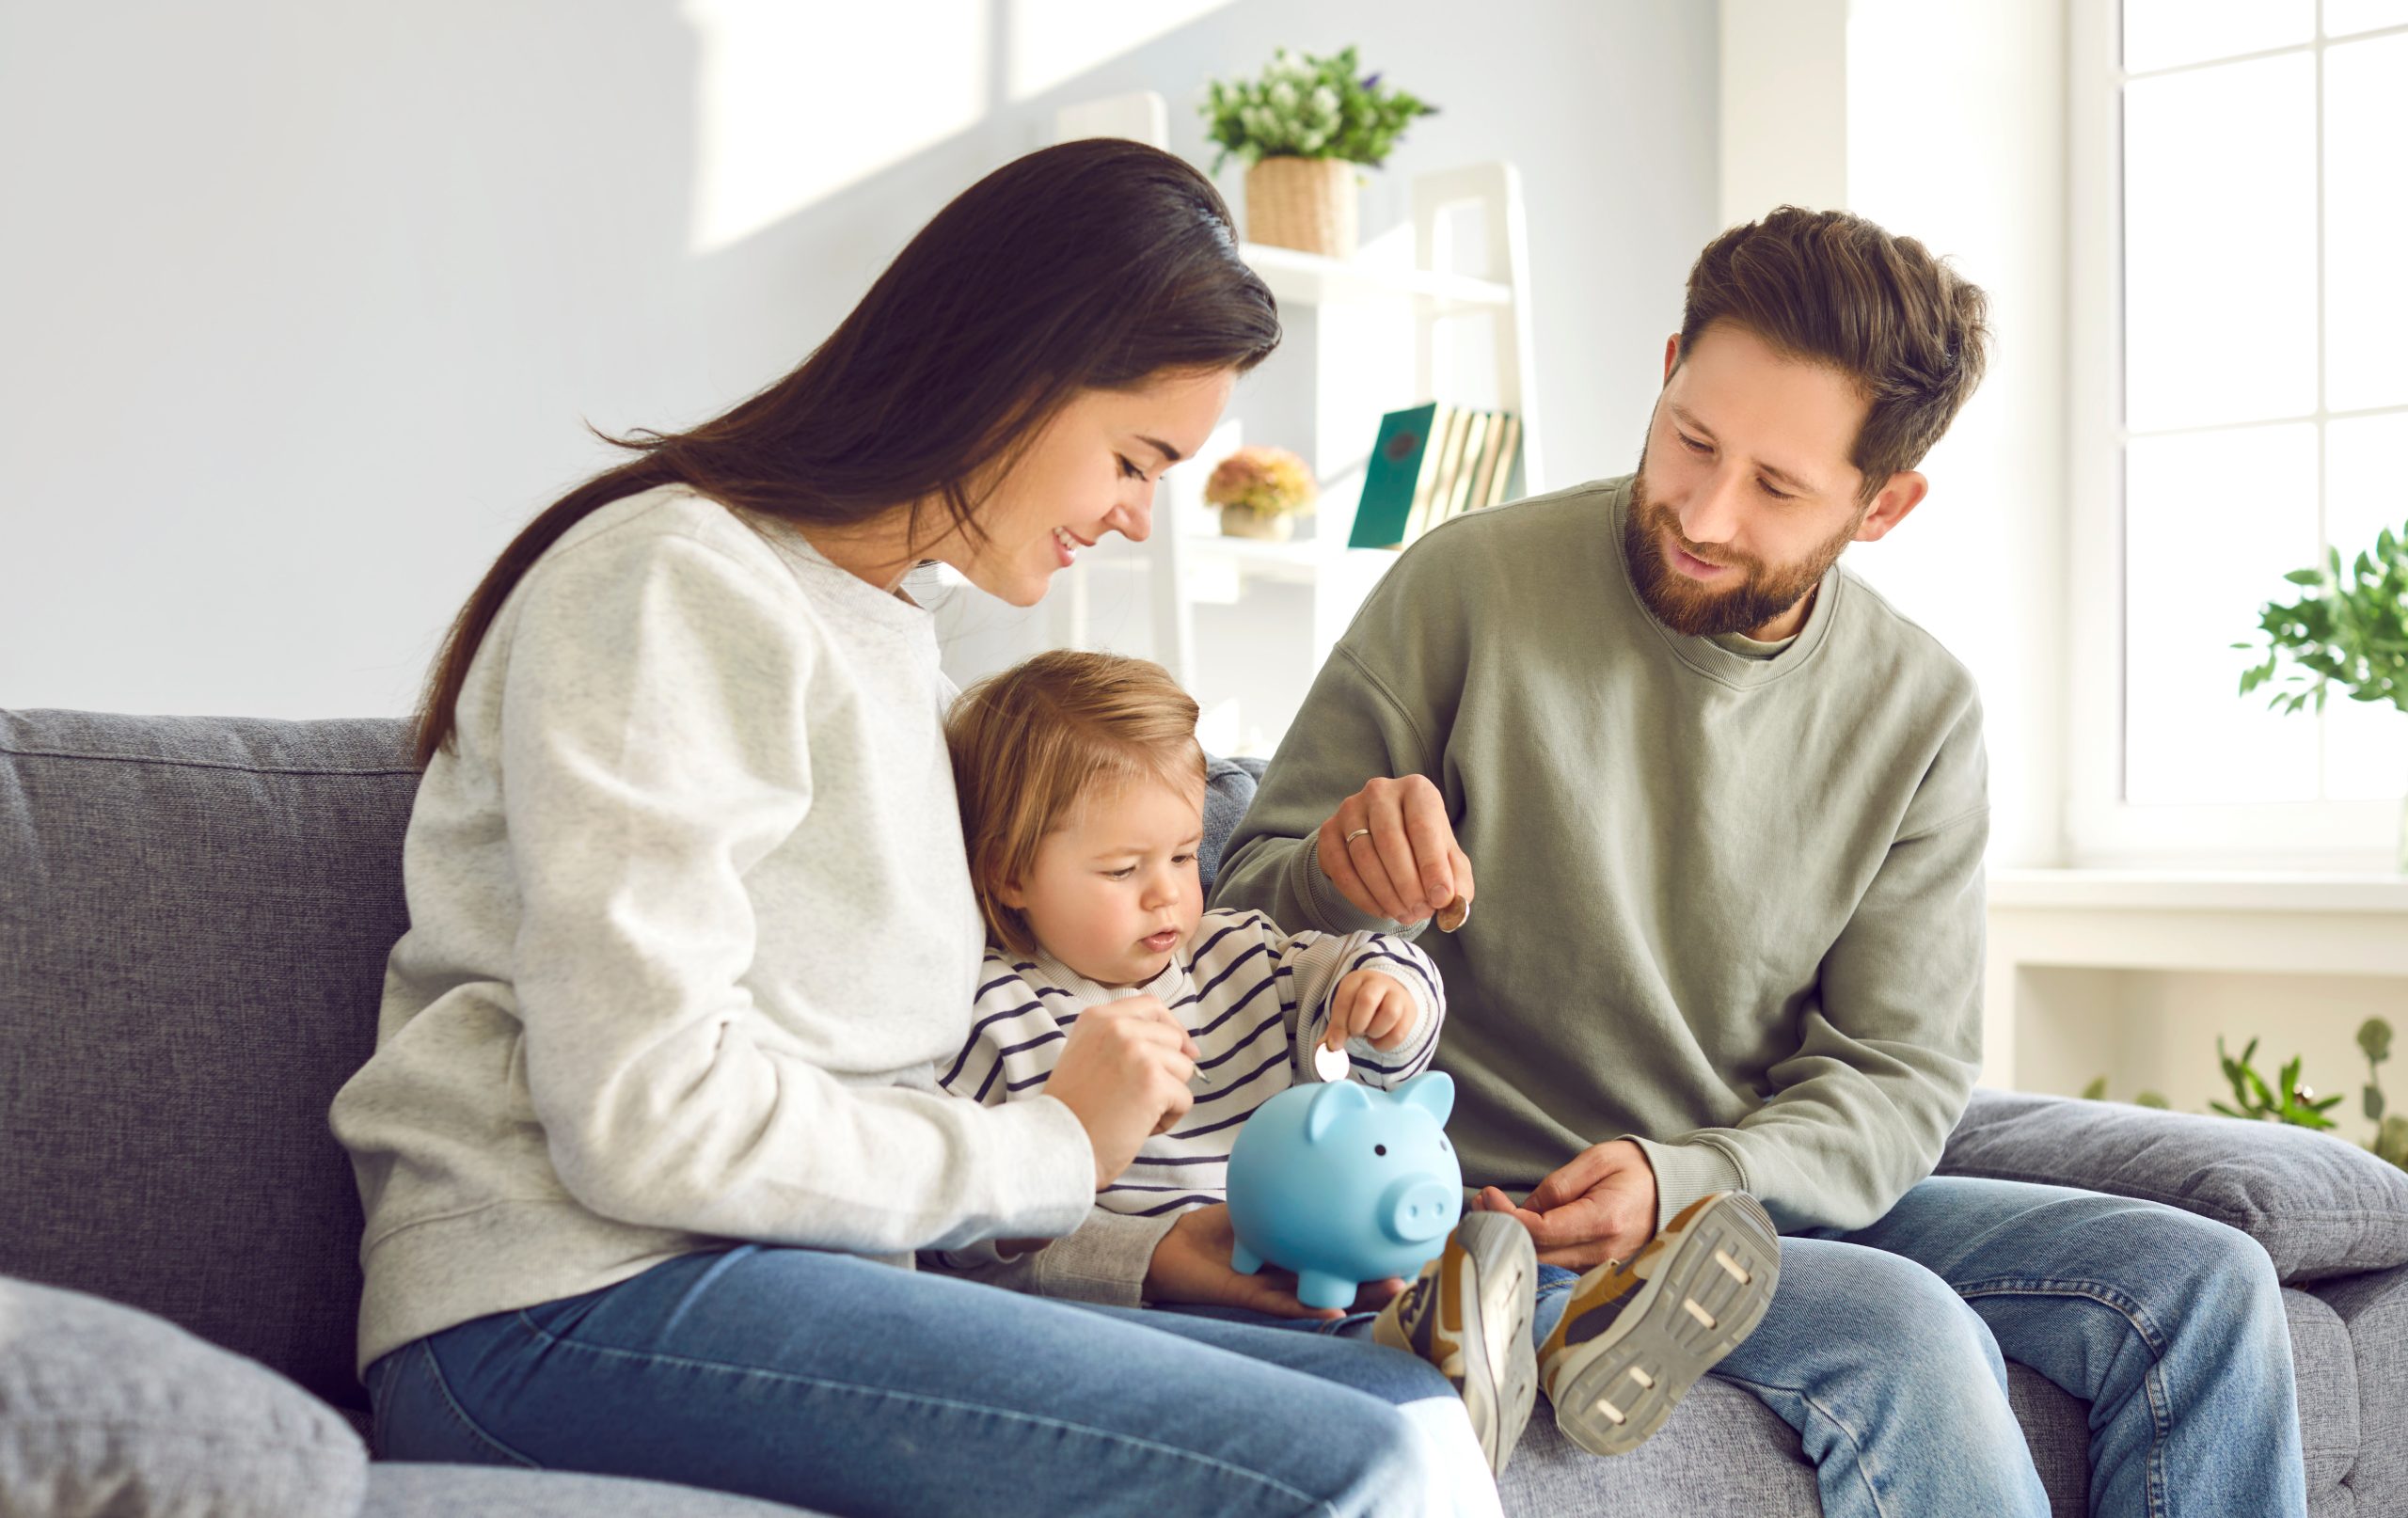 Caring parents teaching toddler baby how to save money. Mom, dad and kid holding piggy bank sitting on sofa at home.